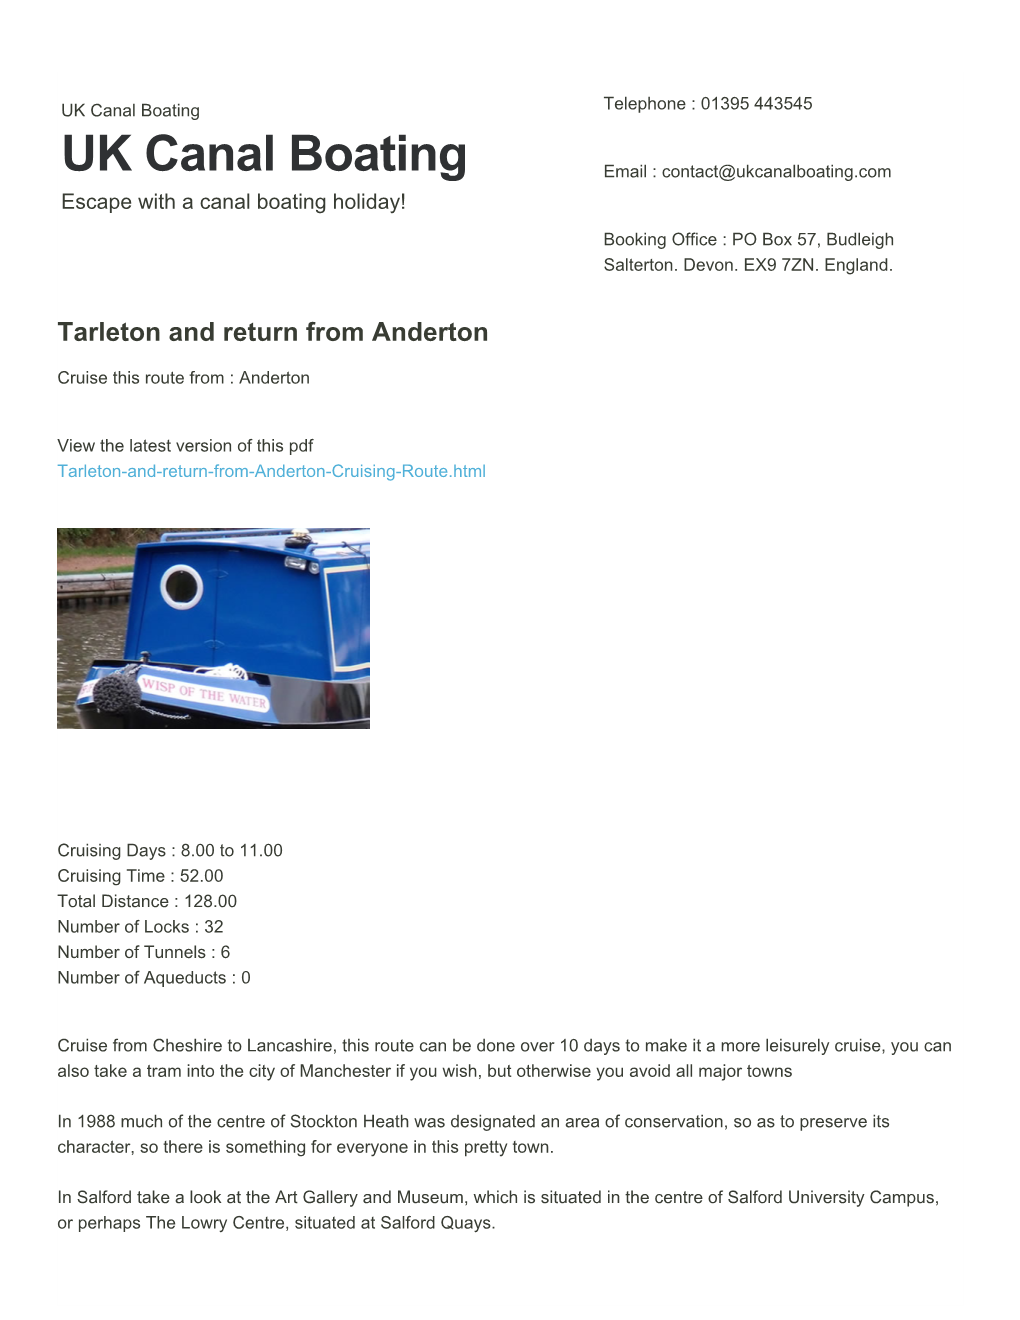 Tarleton and Return from Anderton | UK Canal Boating